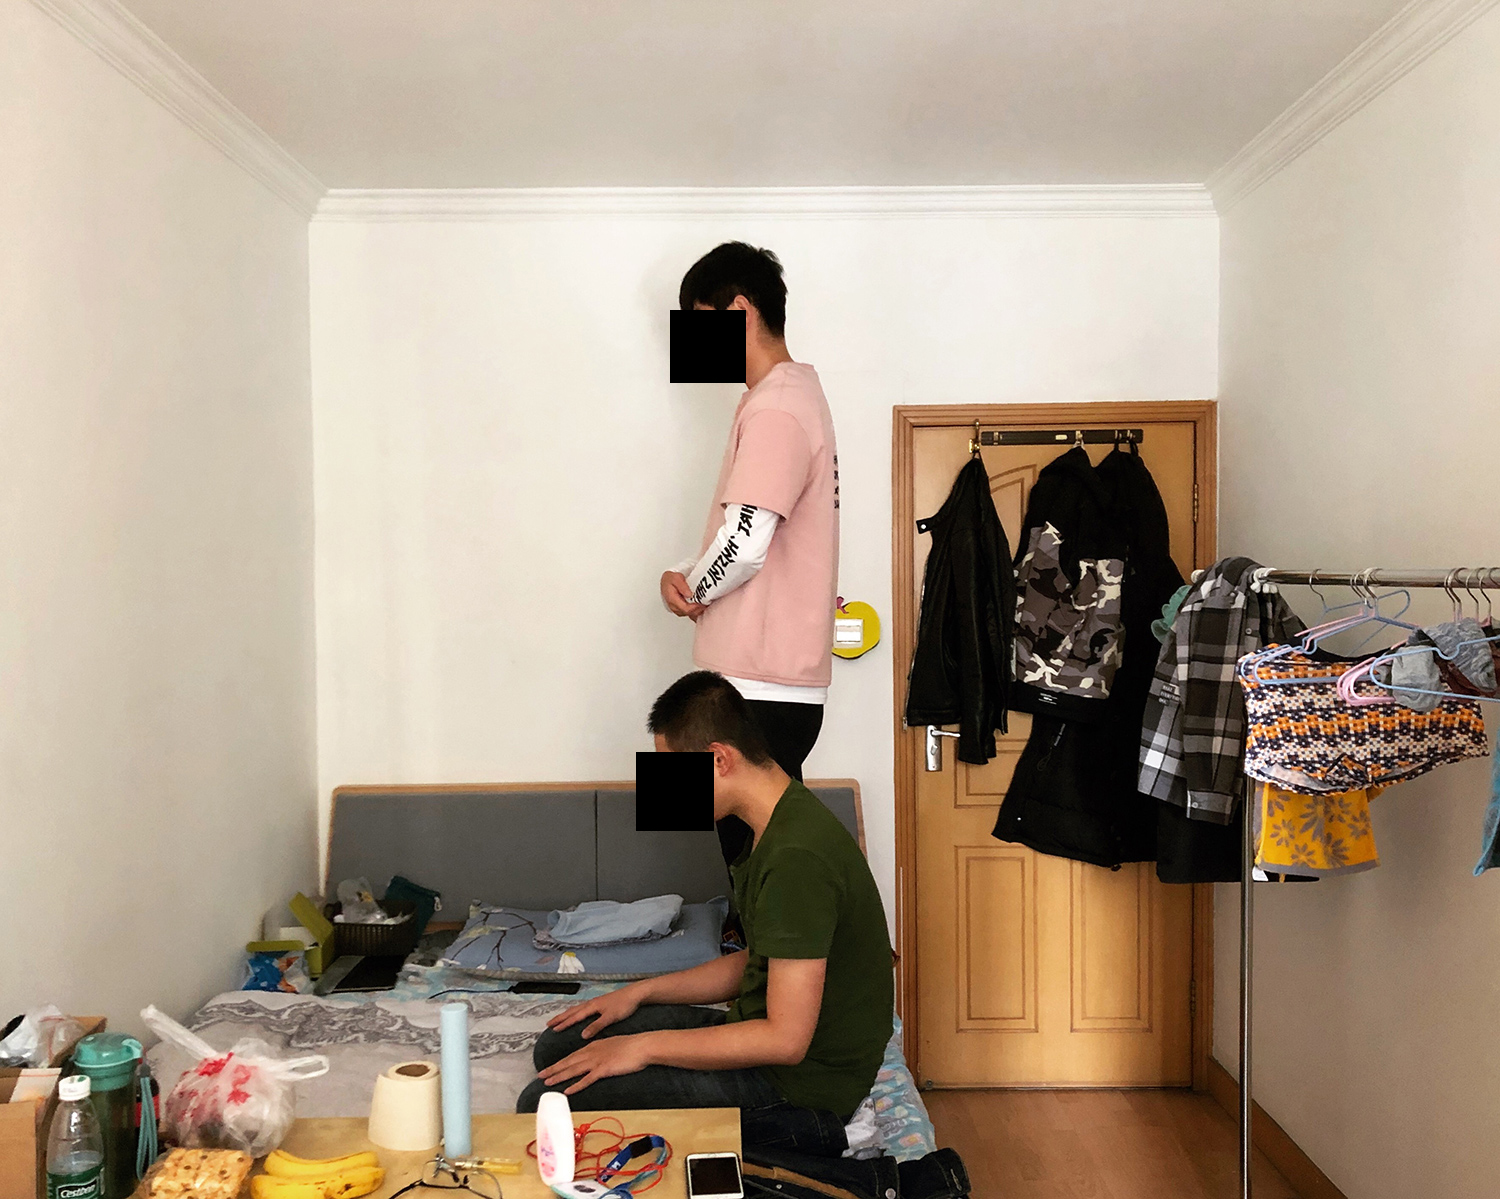 Umar (front) and Kashim (rear) pray at their rented apartment in Beijing, March 2019. After graduating from the University of Jordan, both of them started working at ByteDance, one of the highest valued private tech companies in the world,  as Arabic-language content moderators for the Chinese startup’s popular video app TikTok. Their daily work includes reviewing religious and politically-themed Arabic-language videos. 